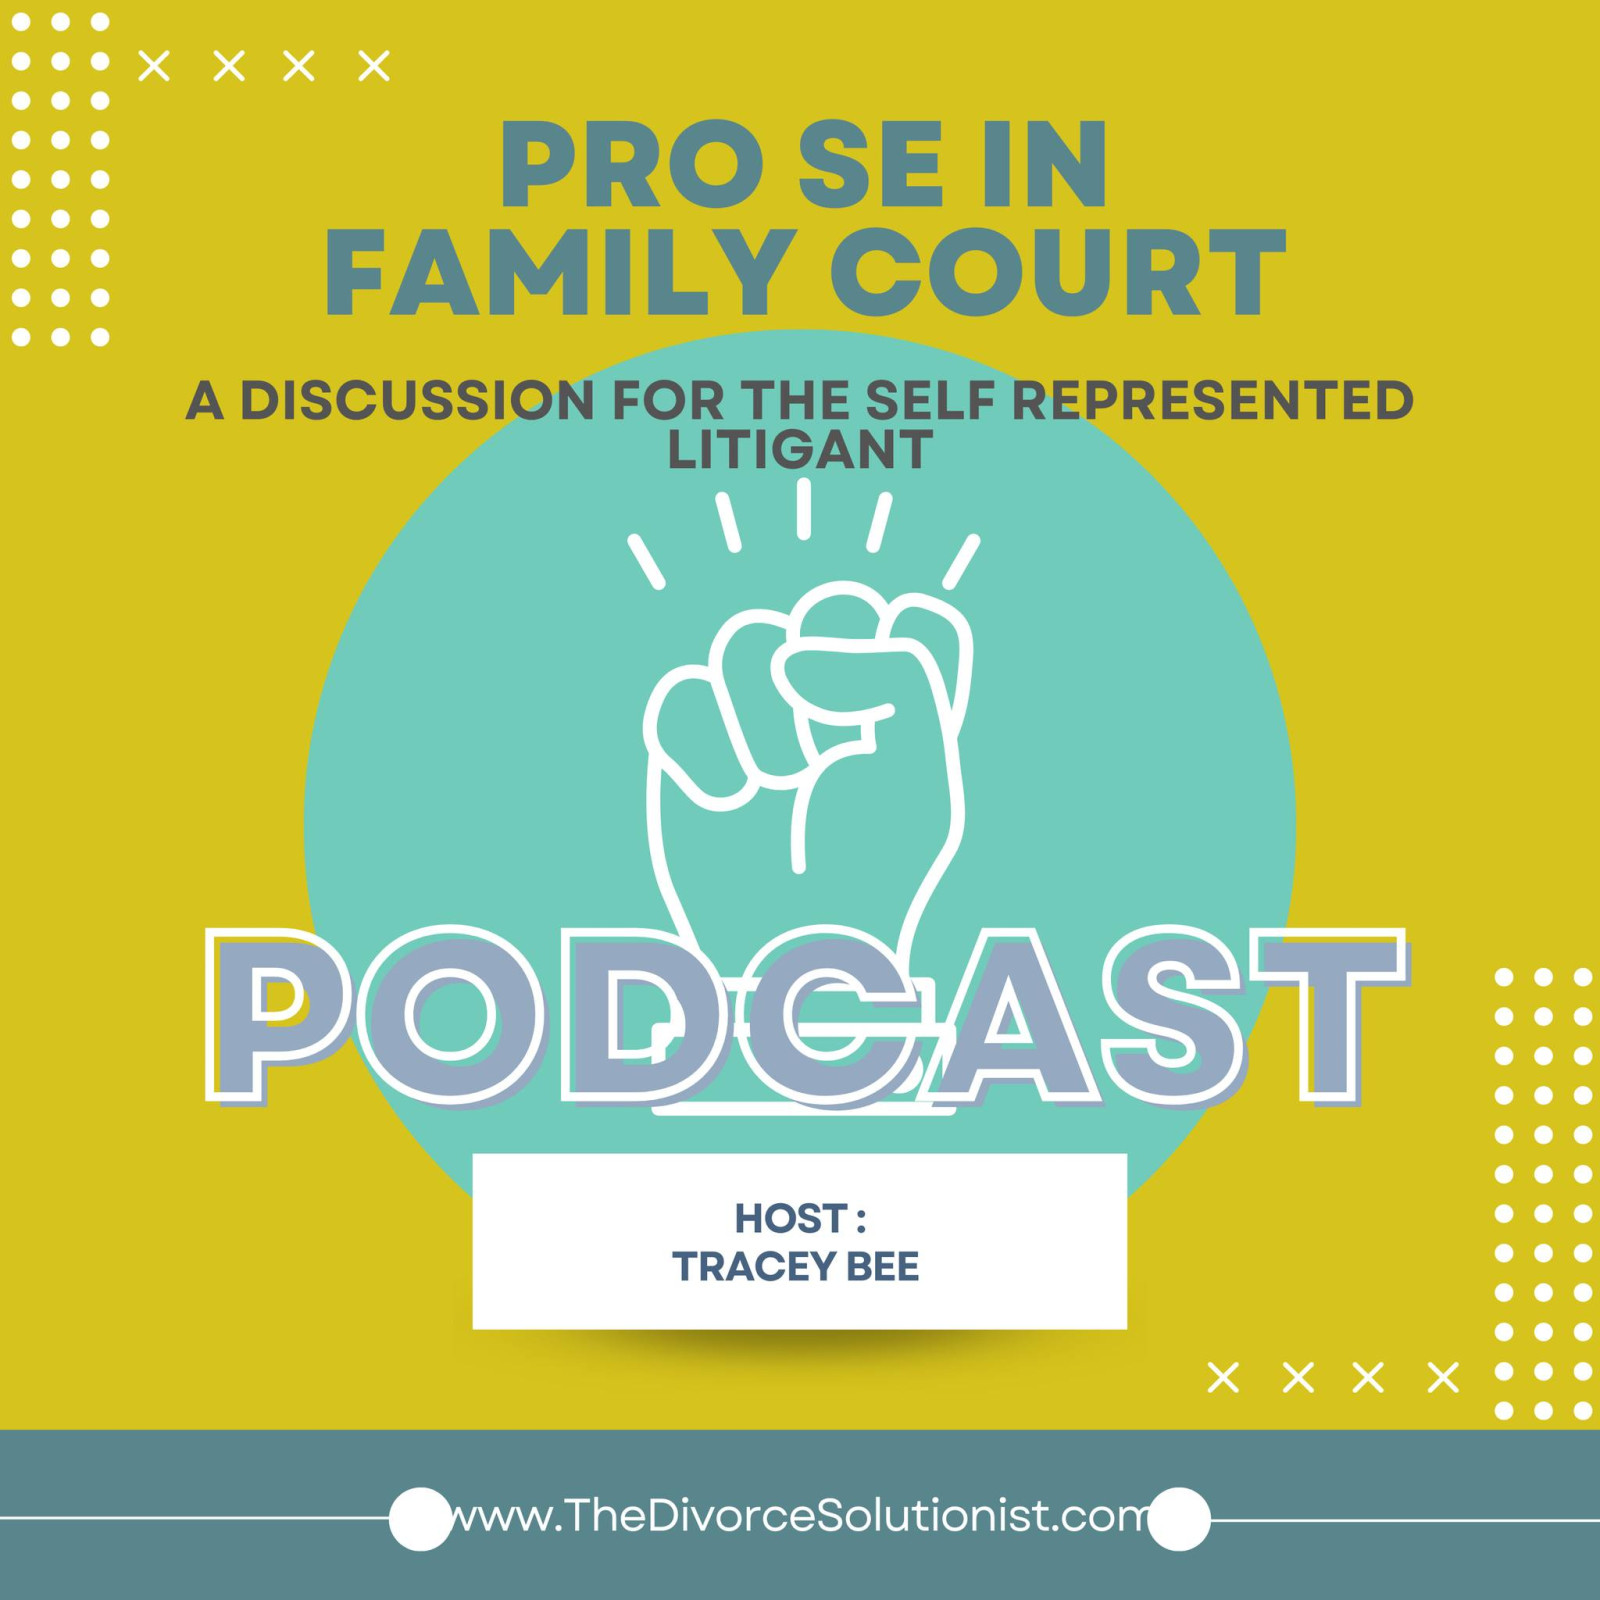 Episode 5: Your Rights as Self-Represented in Family Court